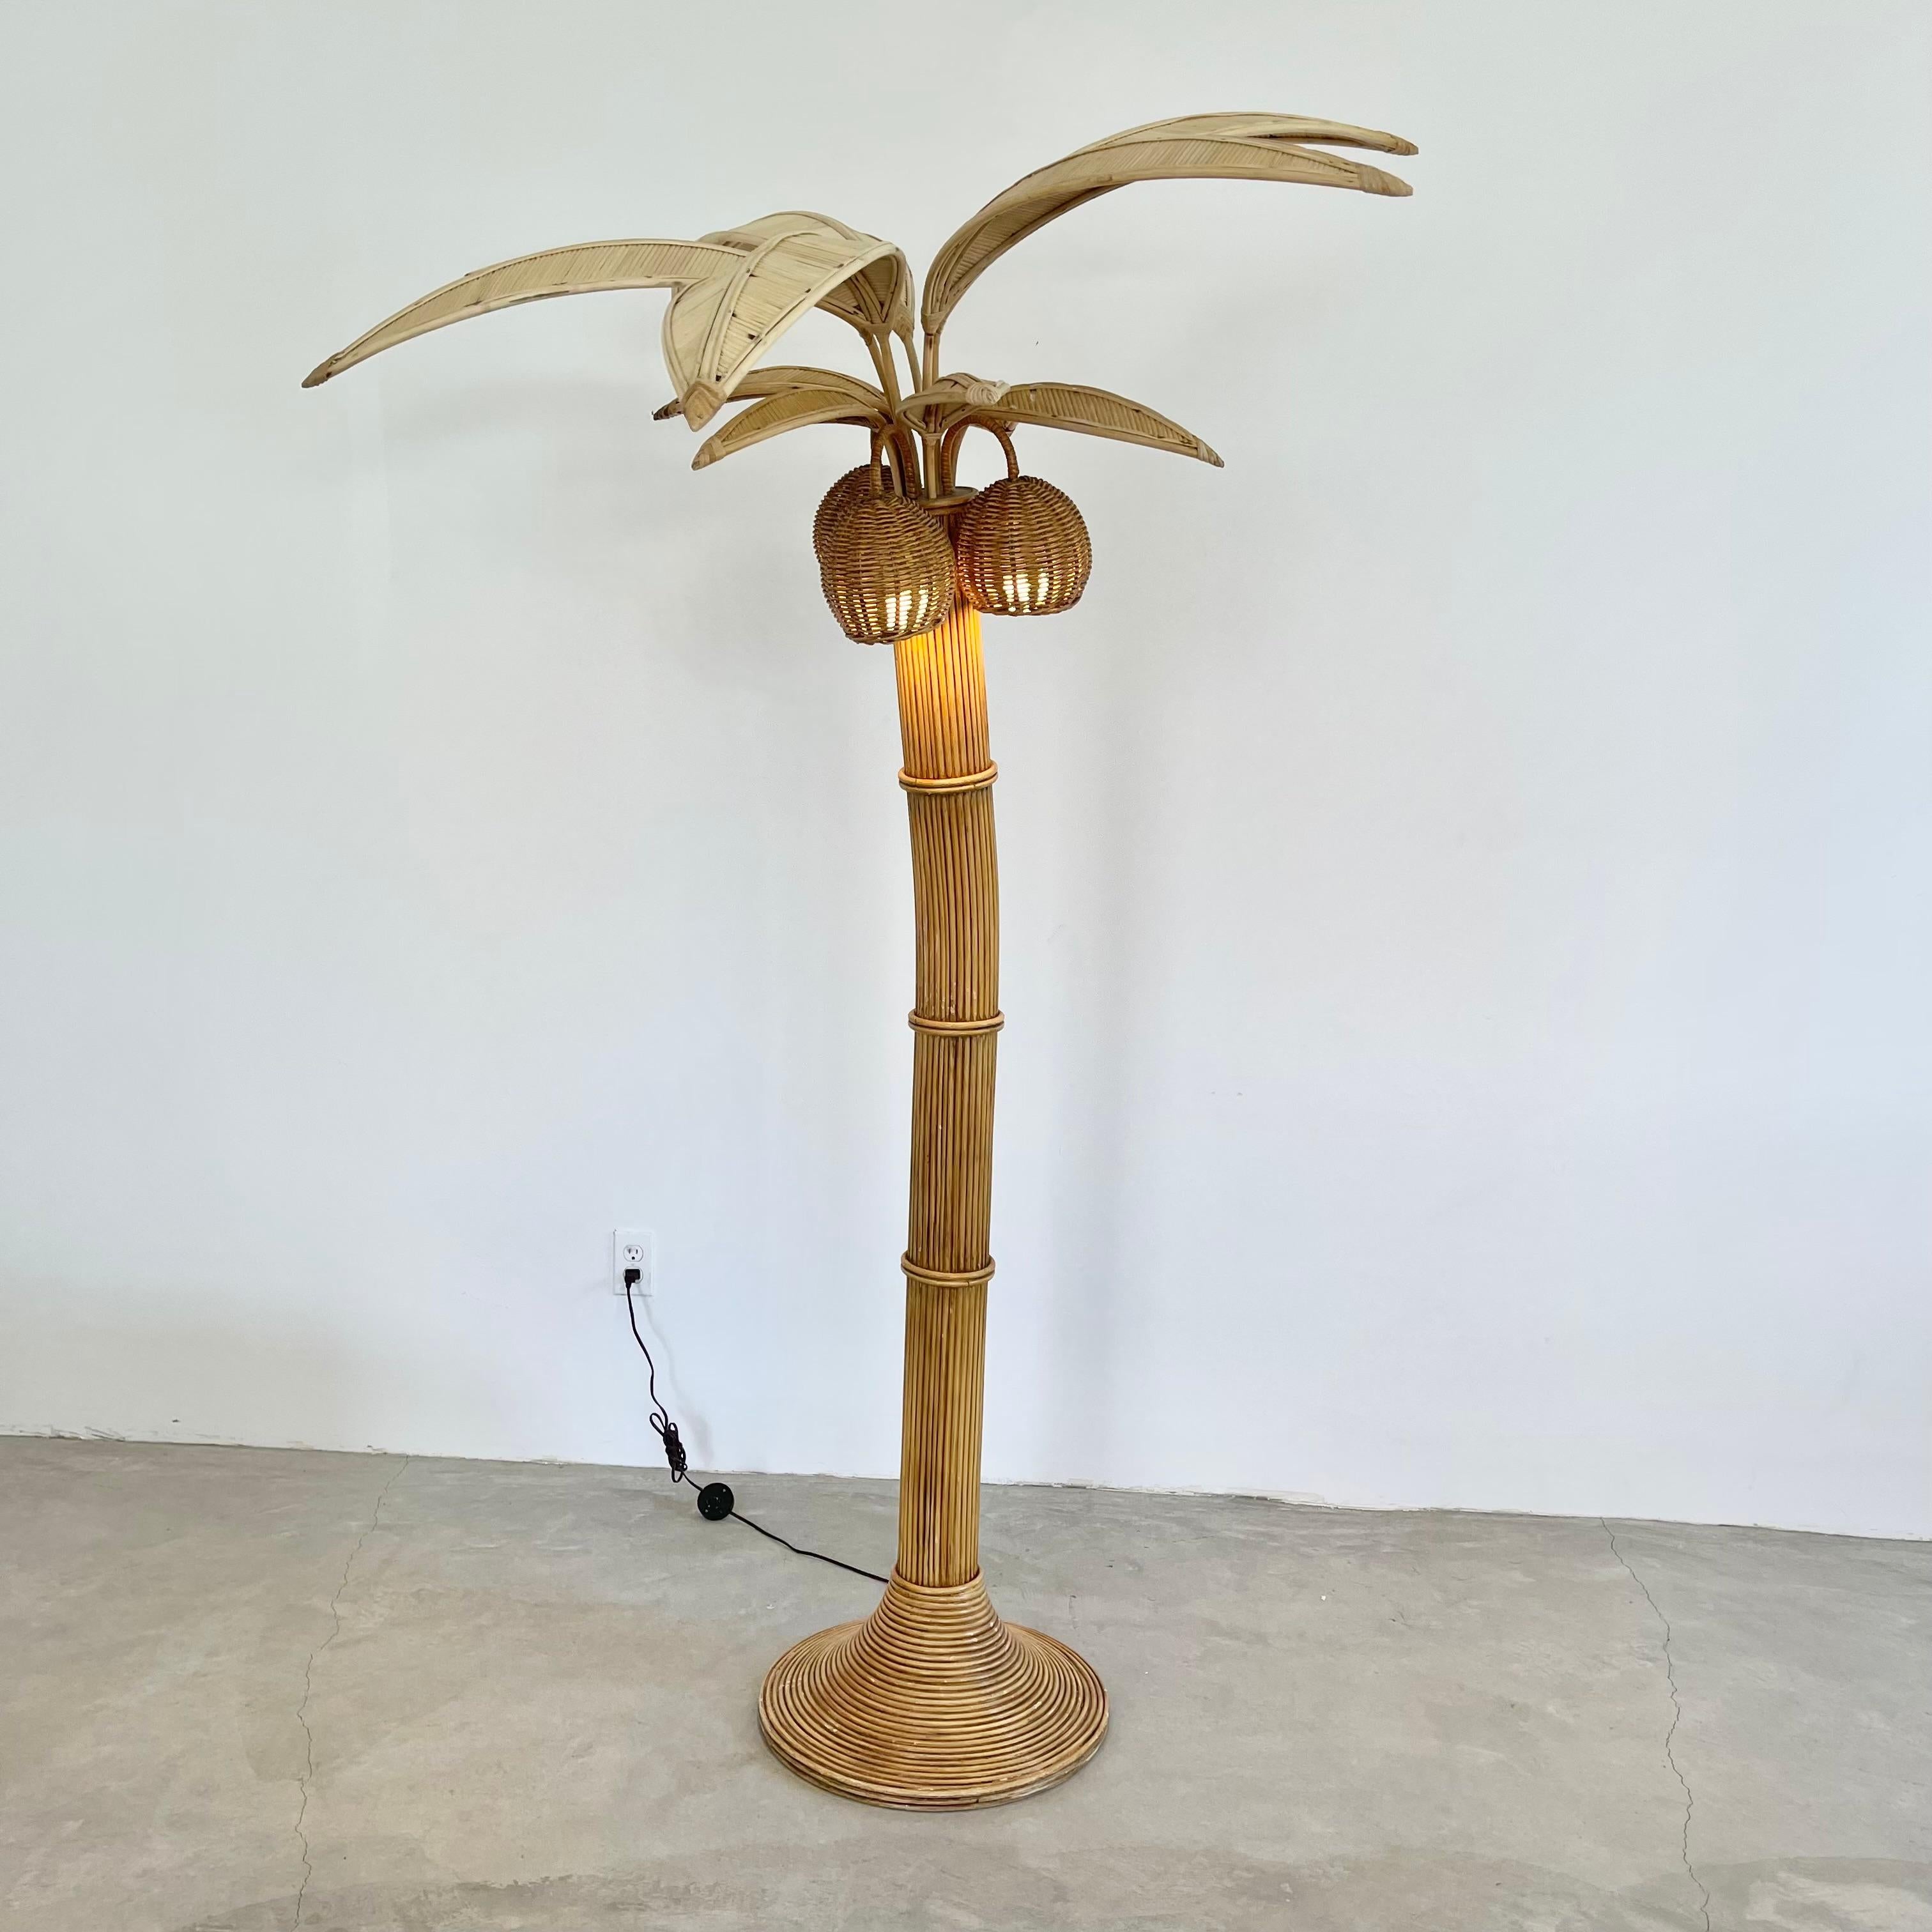 Beachy floor lamp of a Palm tree. Just under 7 feet tall. Made of rattan and wicker. Three wicker coconuts each contain a socket/light inside. Coconuts swivel. Natural color palm leaves made of wicker and rattan sprout out from the top. They rotate